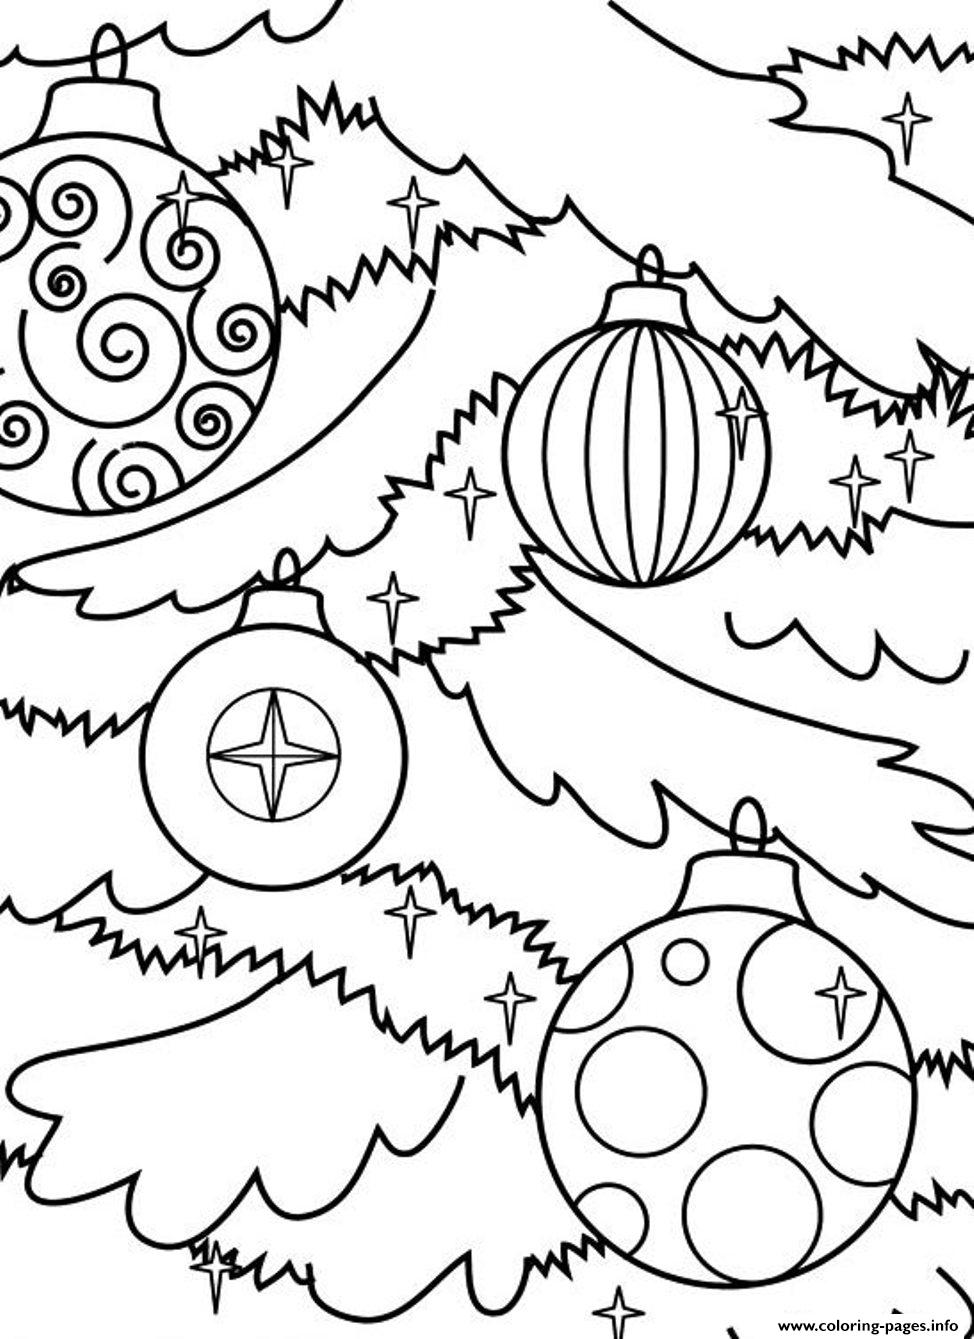 Coloring Pages Christmas Tree Ornaments1531 coloring